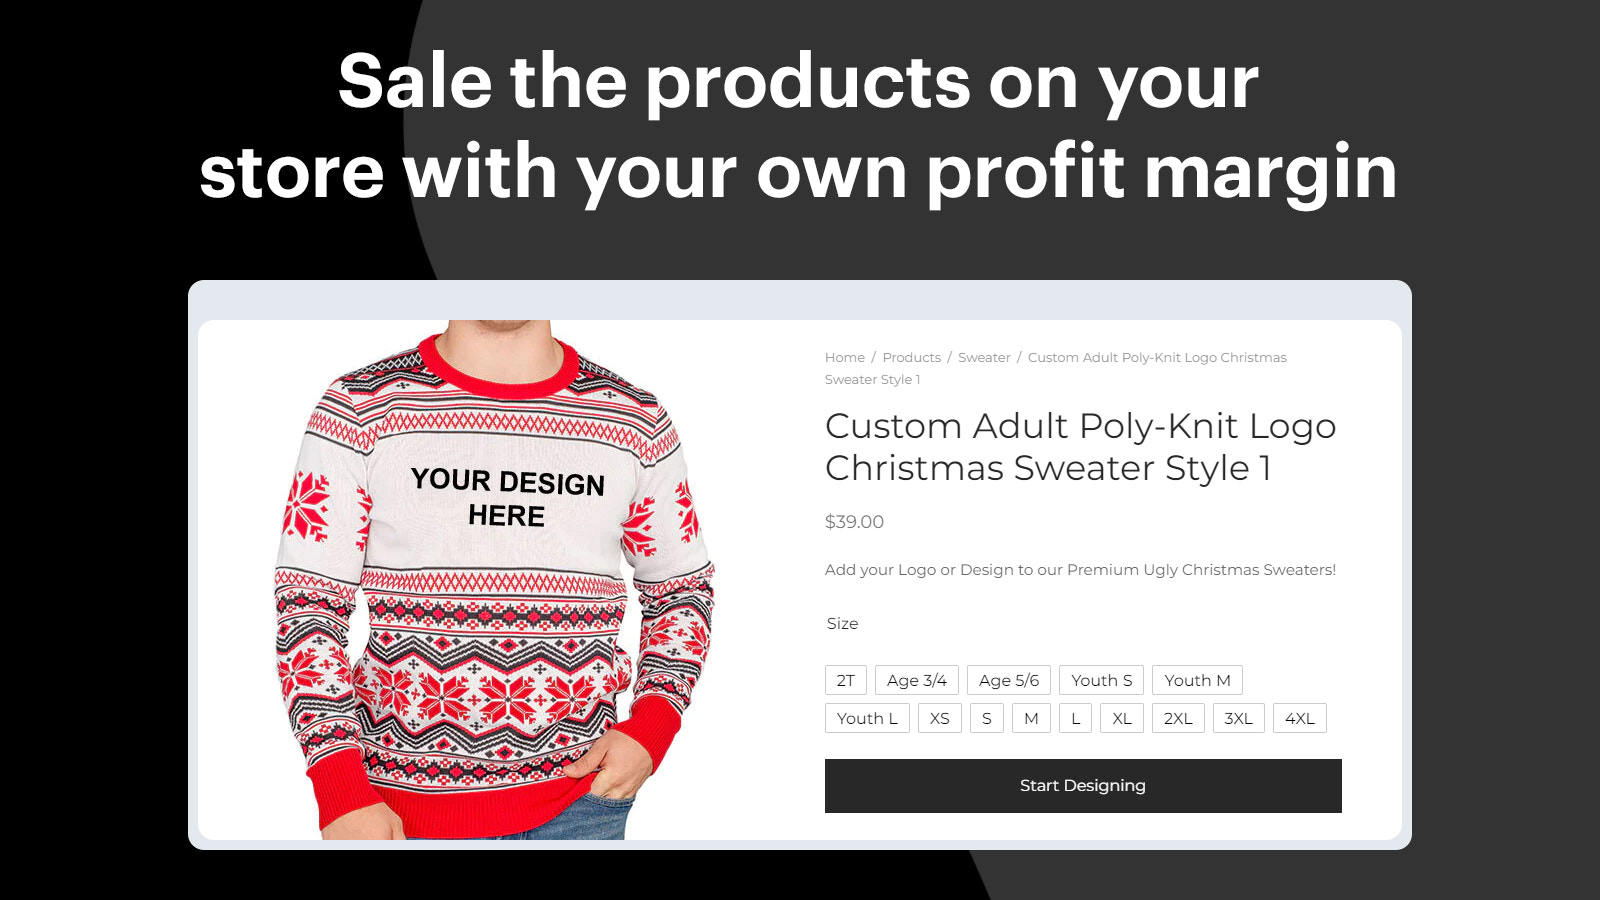 Sale the products on your store with your own profit margin